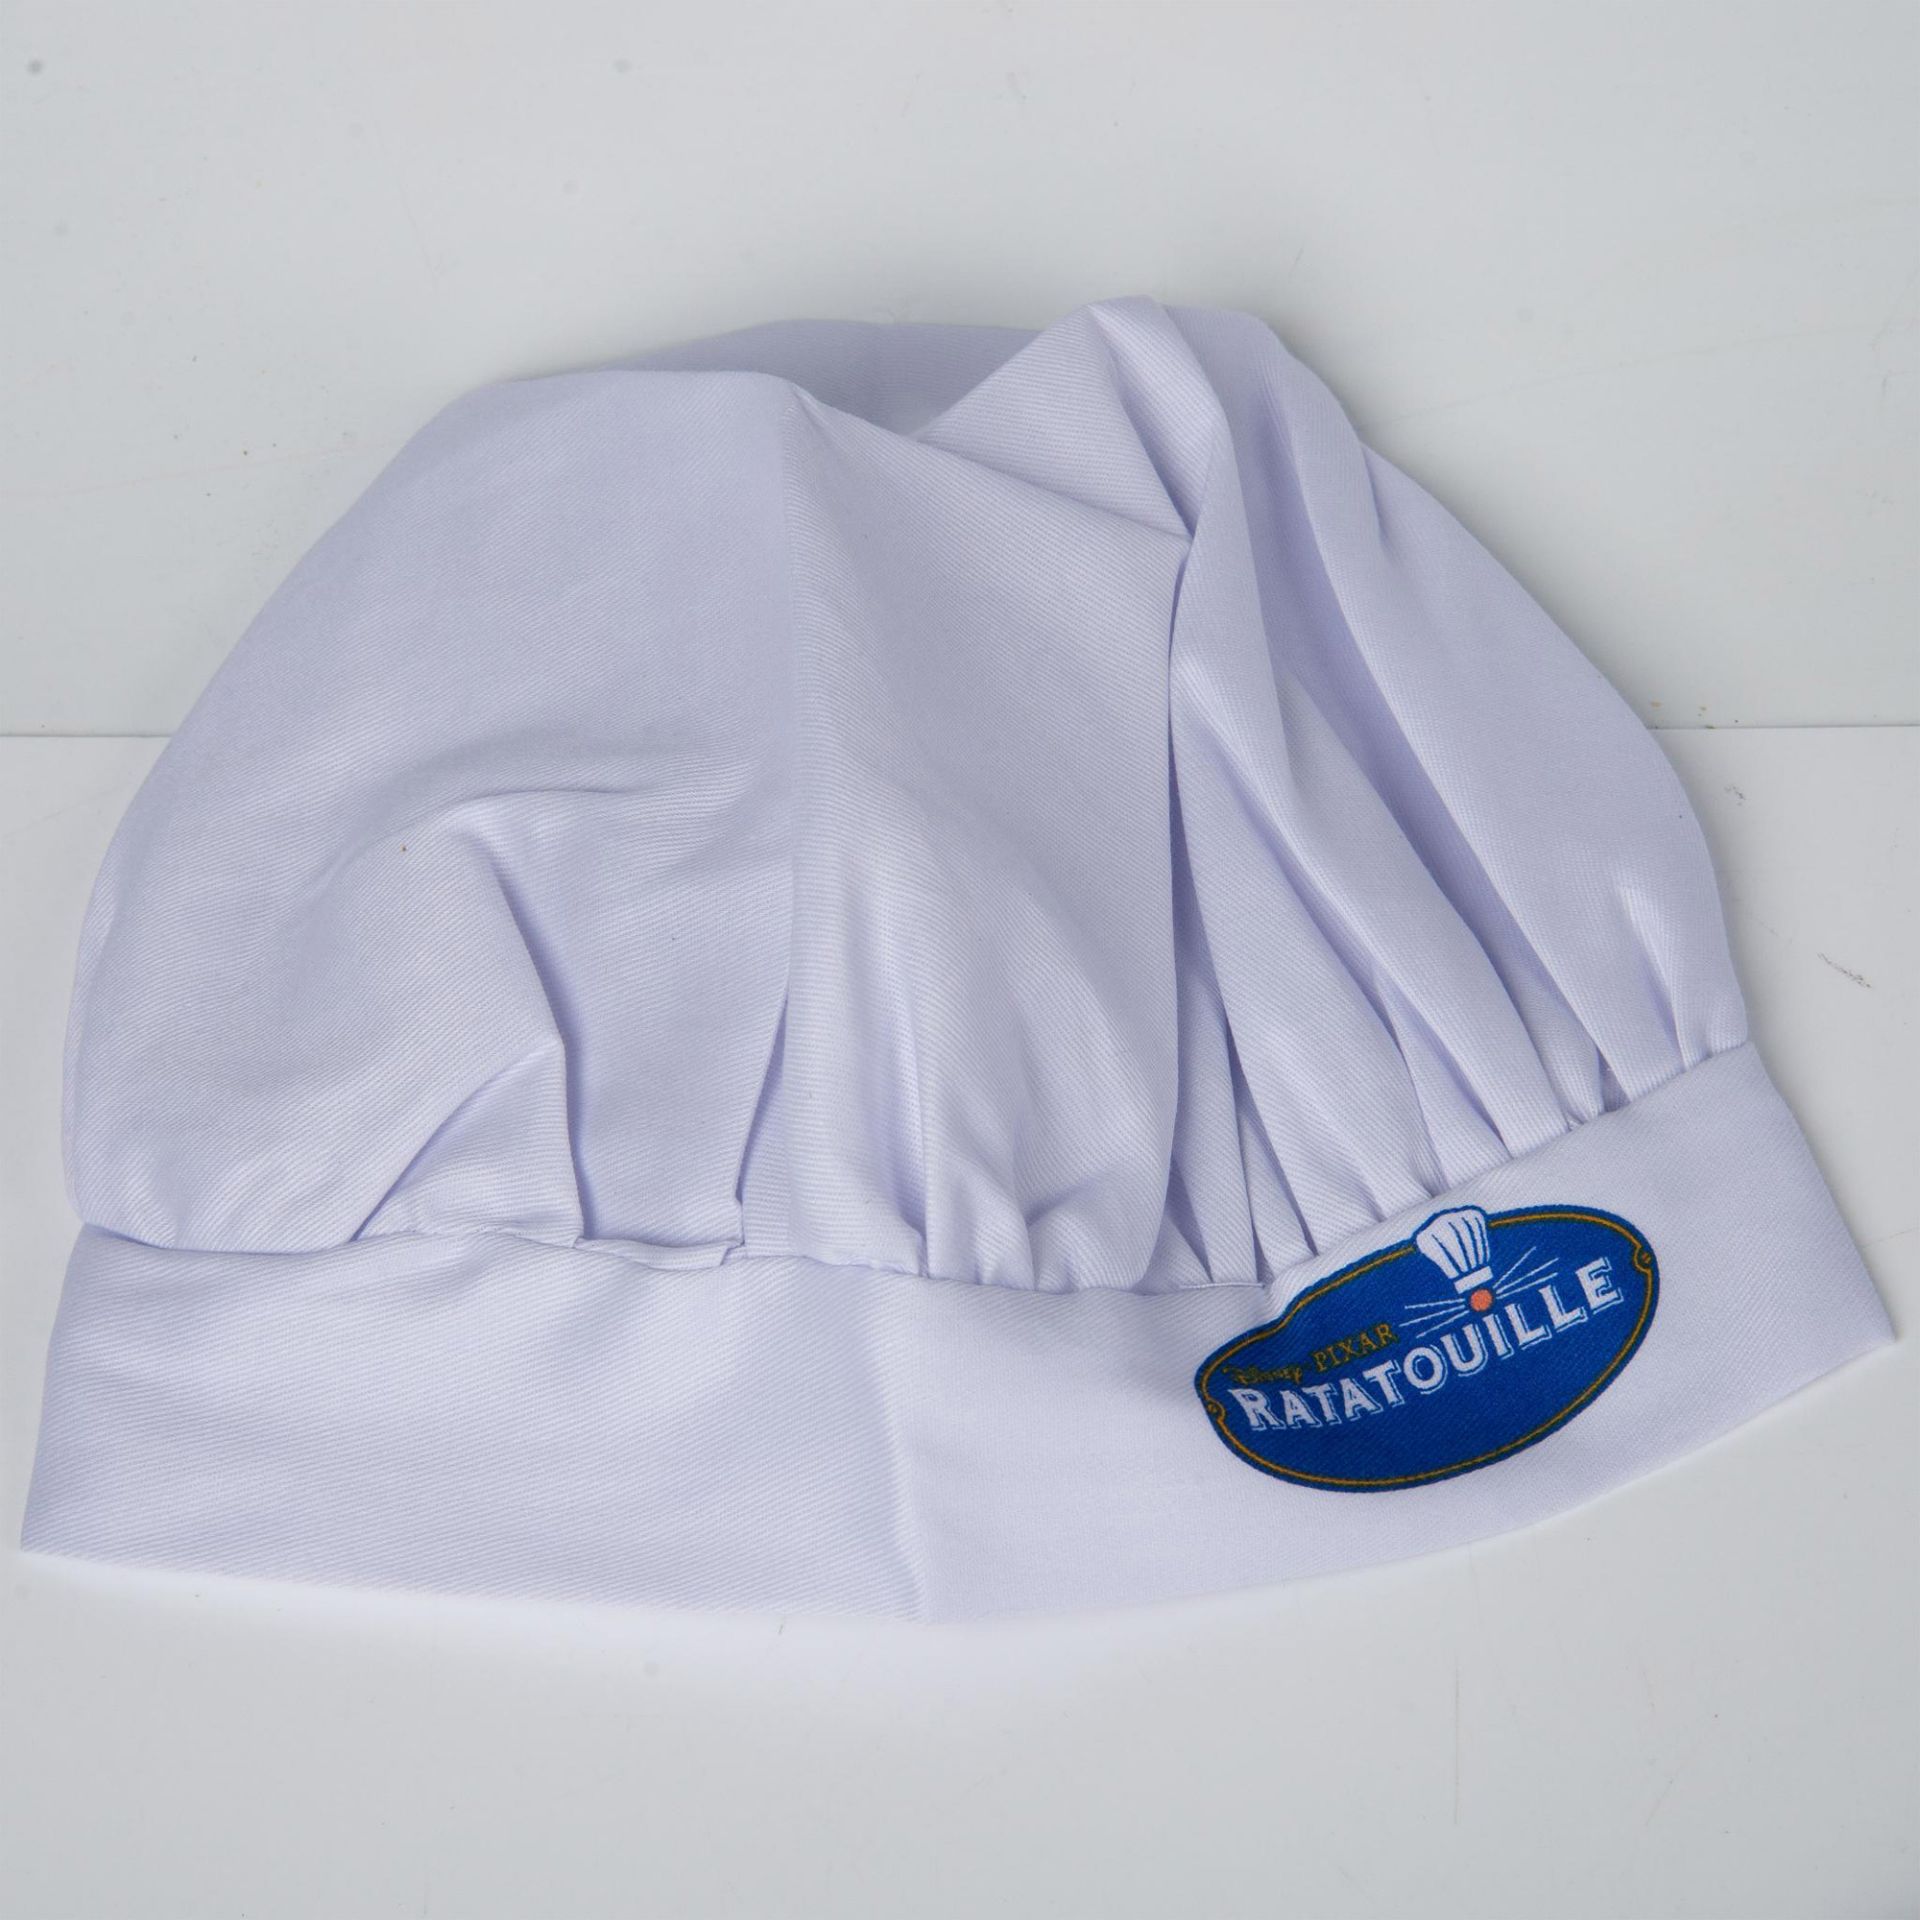 Adorable Disney Pixar Ratatouille Youth Apron and Chef's Hat - Image 7 of 7